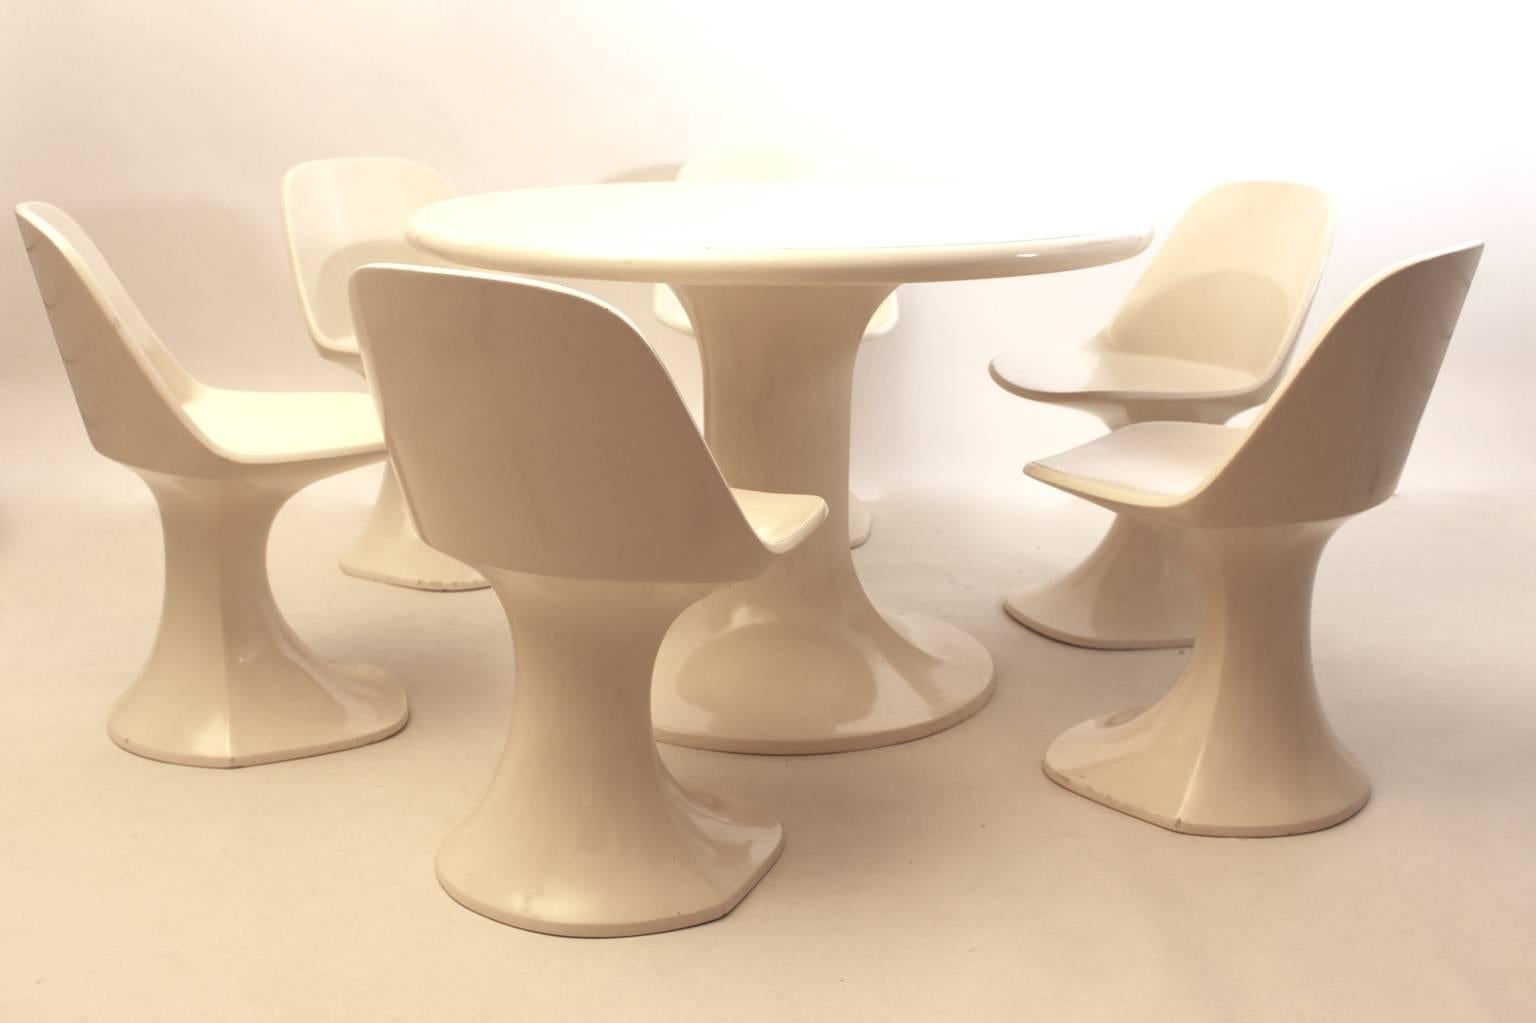 Space Age vintage Dining Room Set consists of a circular like  dining table and six matching sculptural dining chairs from white lacquered fiberglass  1970s by HT-Collection, Finland ( Huonekaluuluote )
All six dining chairs and the dining table are